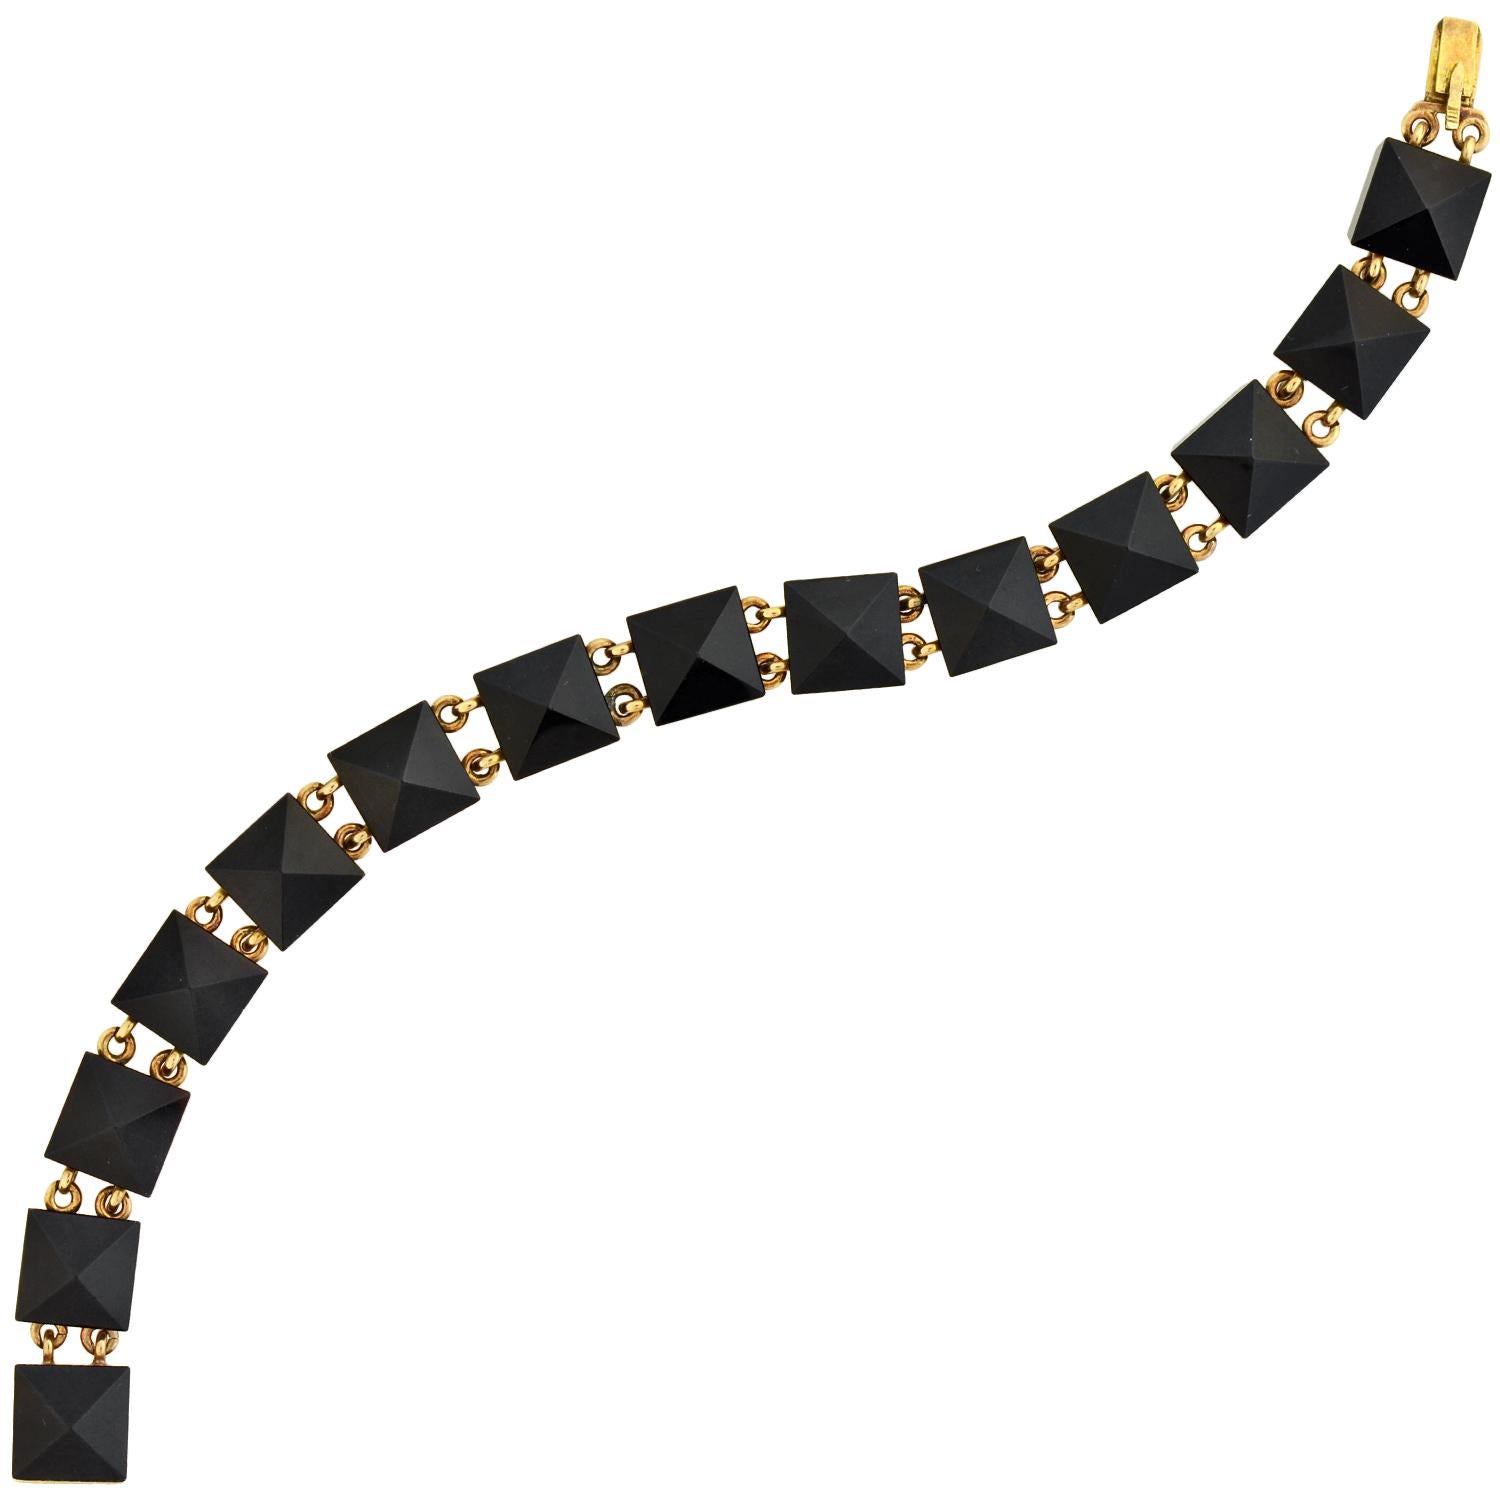 A simply stunning onyx link bracelet from the Victorian (ca1880) era! Crafted in 14kt rosy yellow gold, this gorgeous piece is comprised of 14 hand-carved onyx links which are connected together to form a flexible design. Each stone is square in